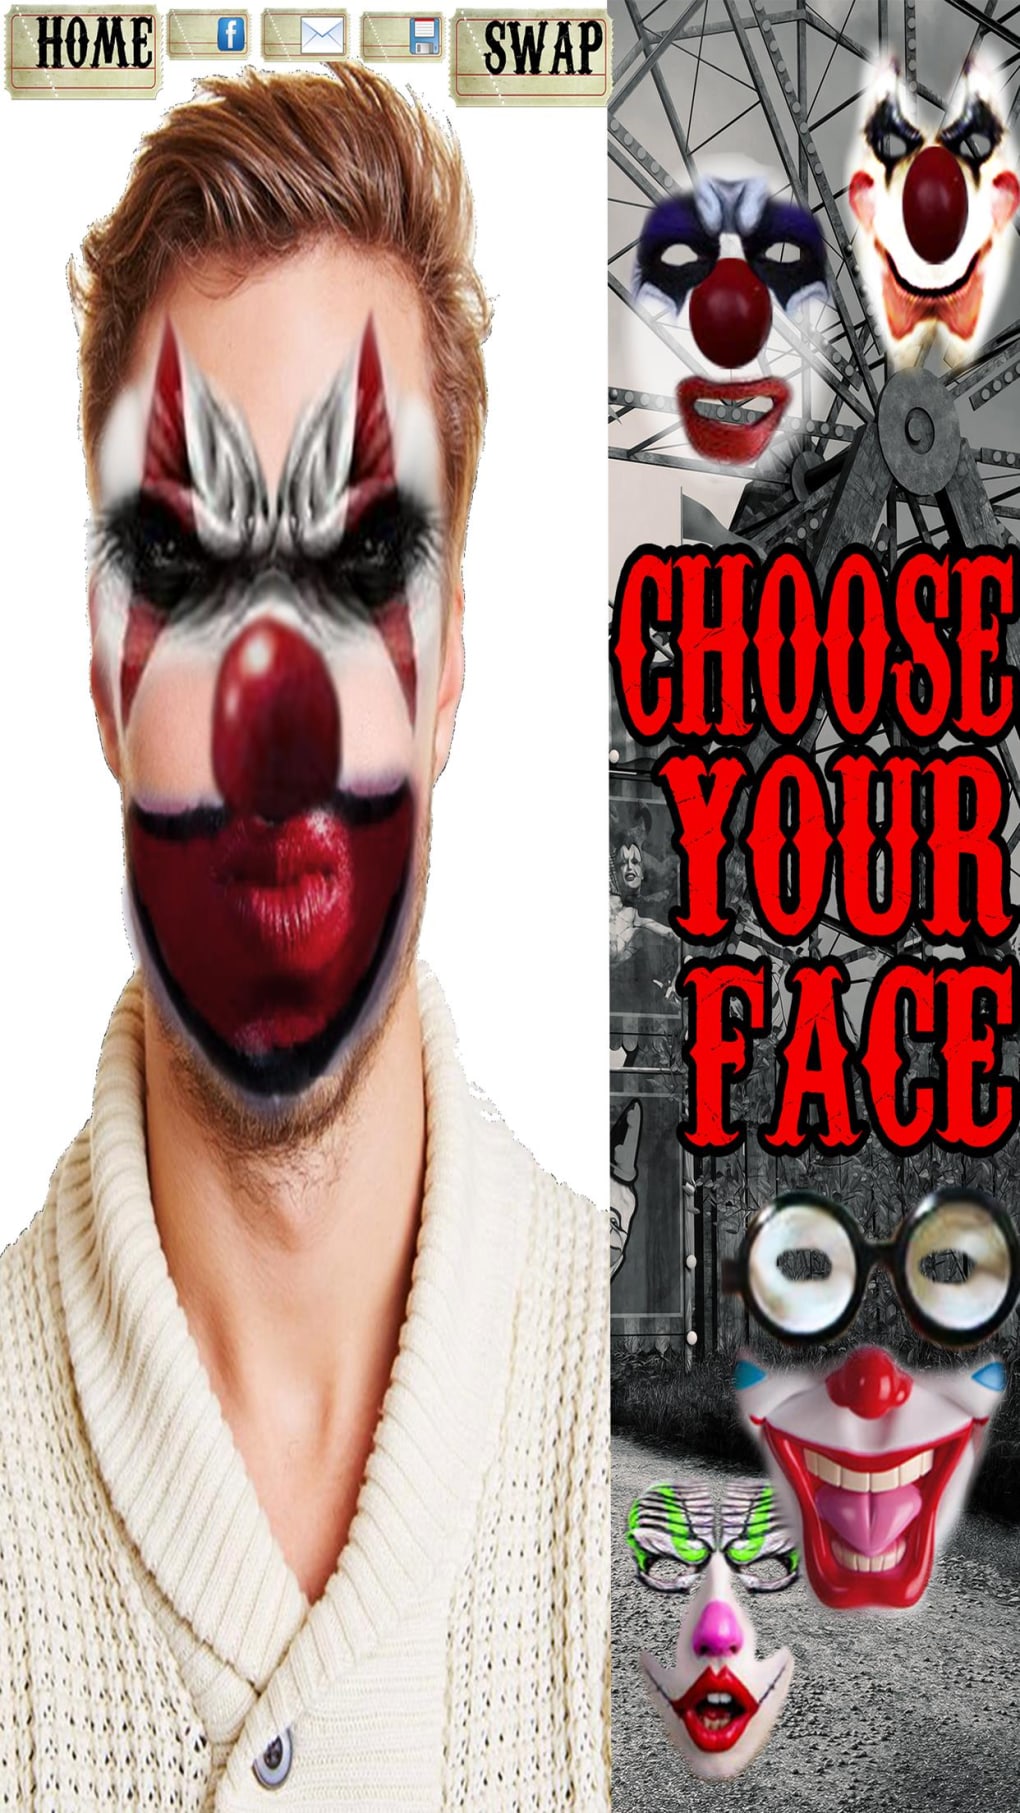 Clown Face - Scary Face Booth for iPhone - Download